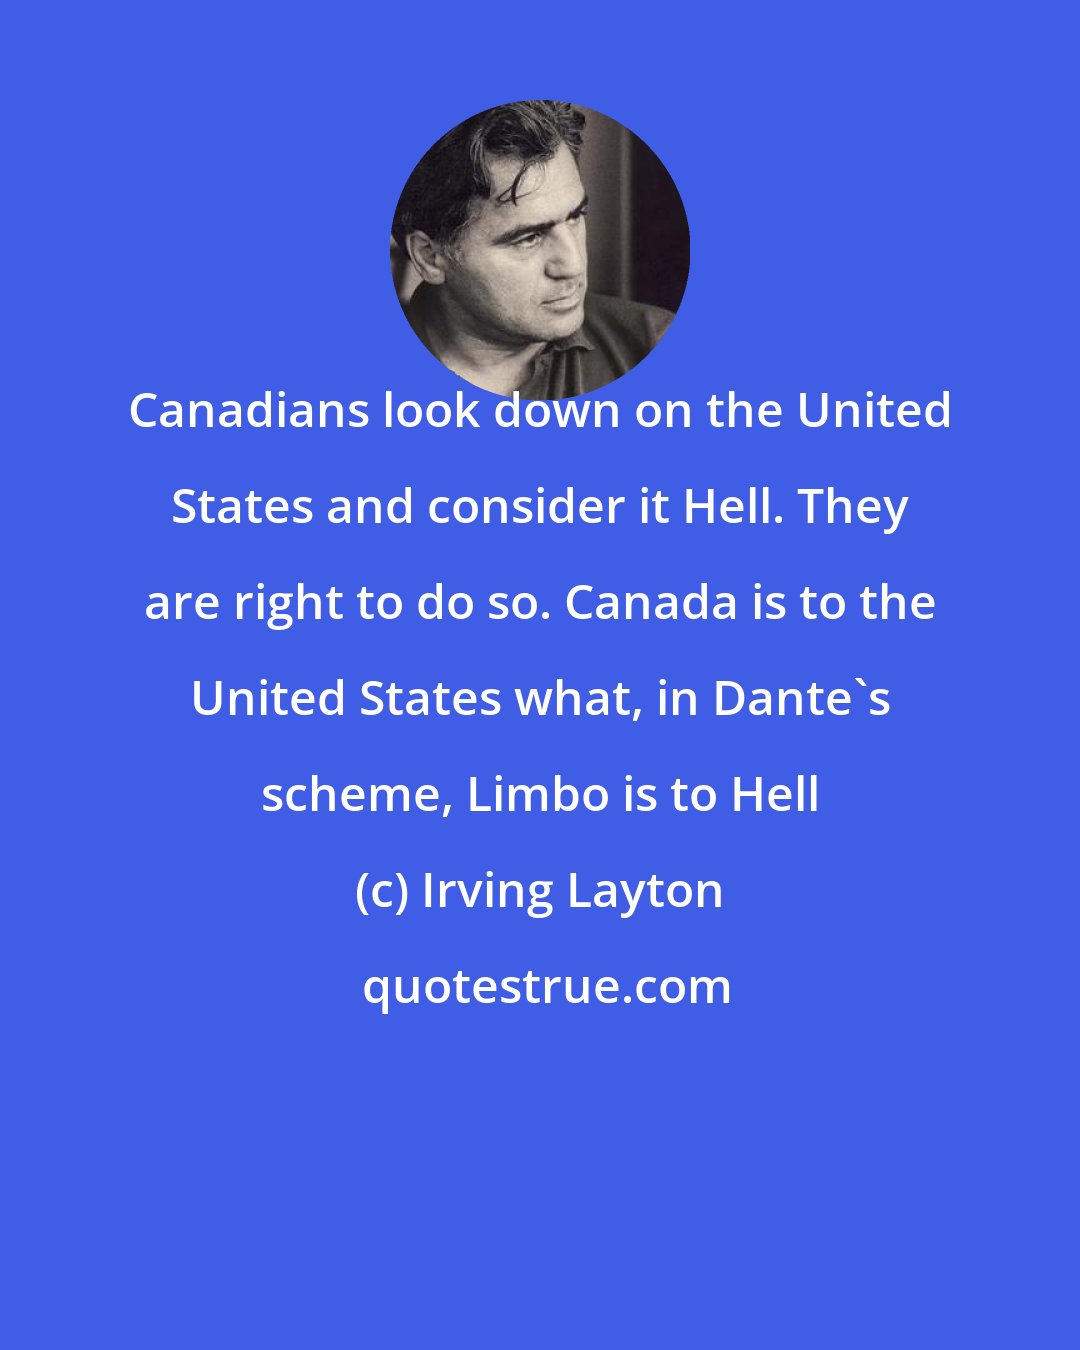 Irving Layton: Canadians look down on the United States and consider it Hell. They are right to do so. Canada is to the United States what, in Dante's scheme, Limbo is to Hell